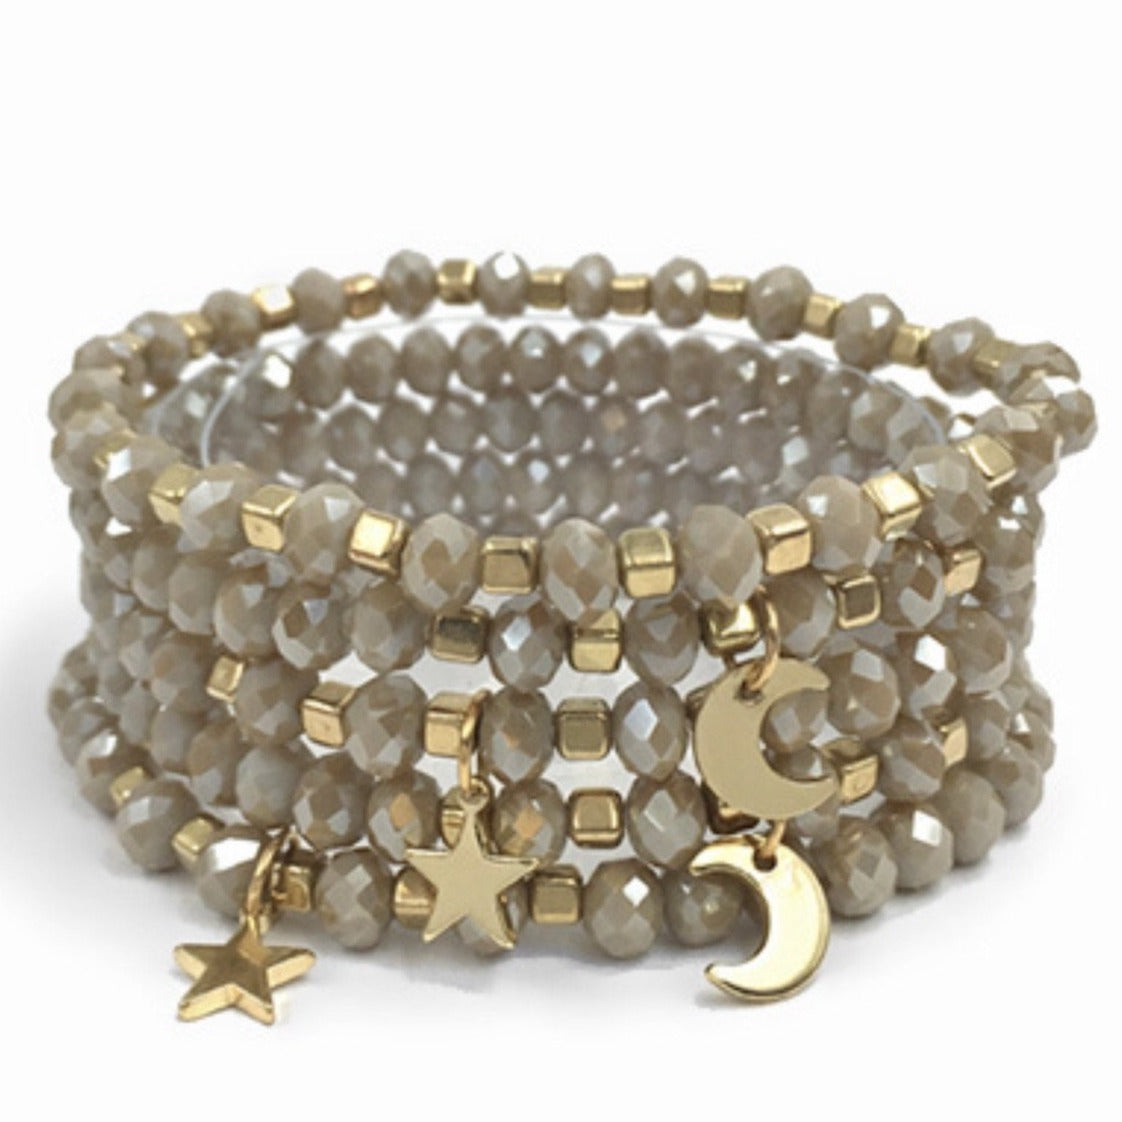 Stars and the Moon Bracelet in Taupe